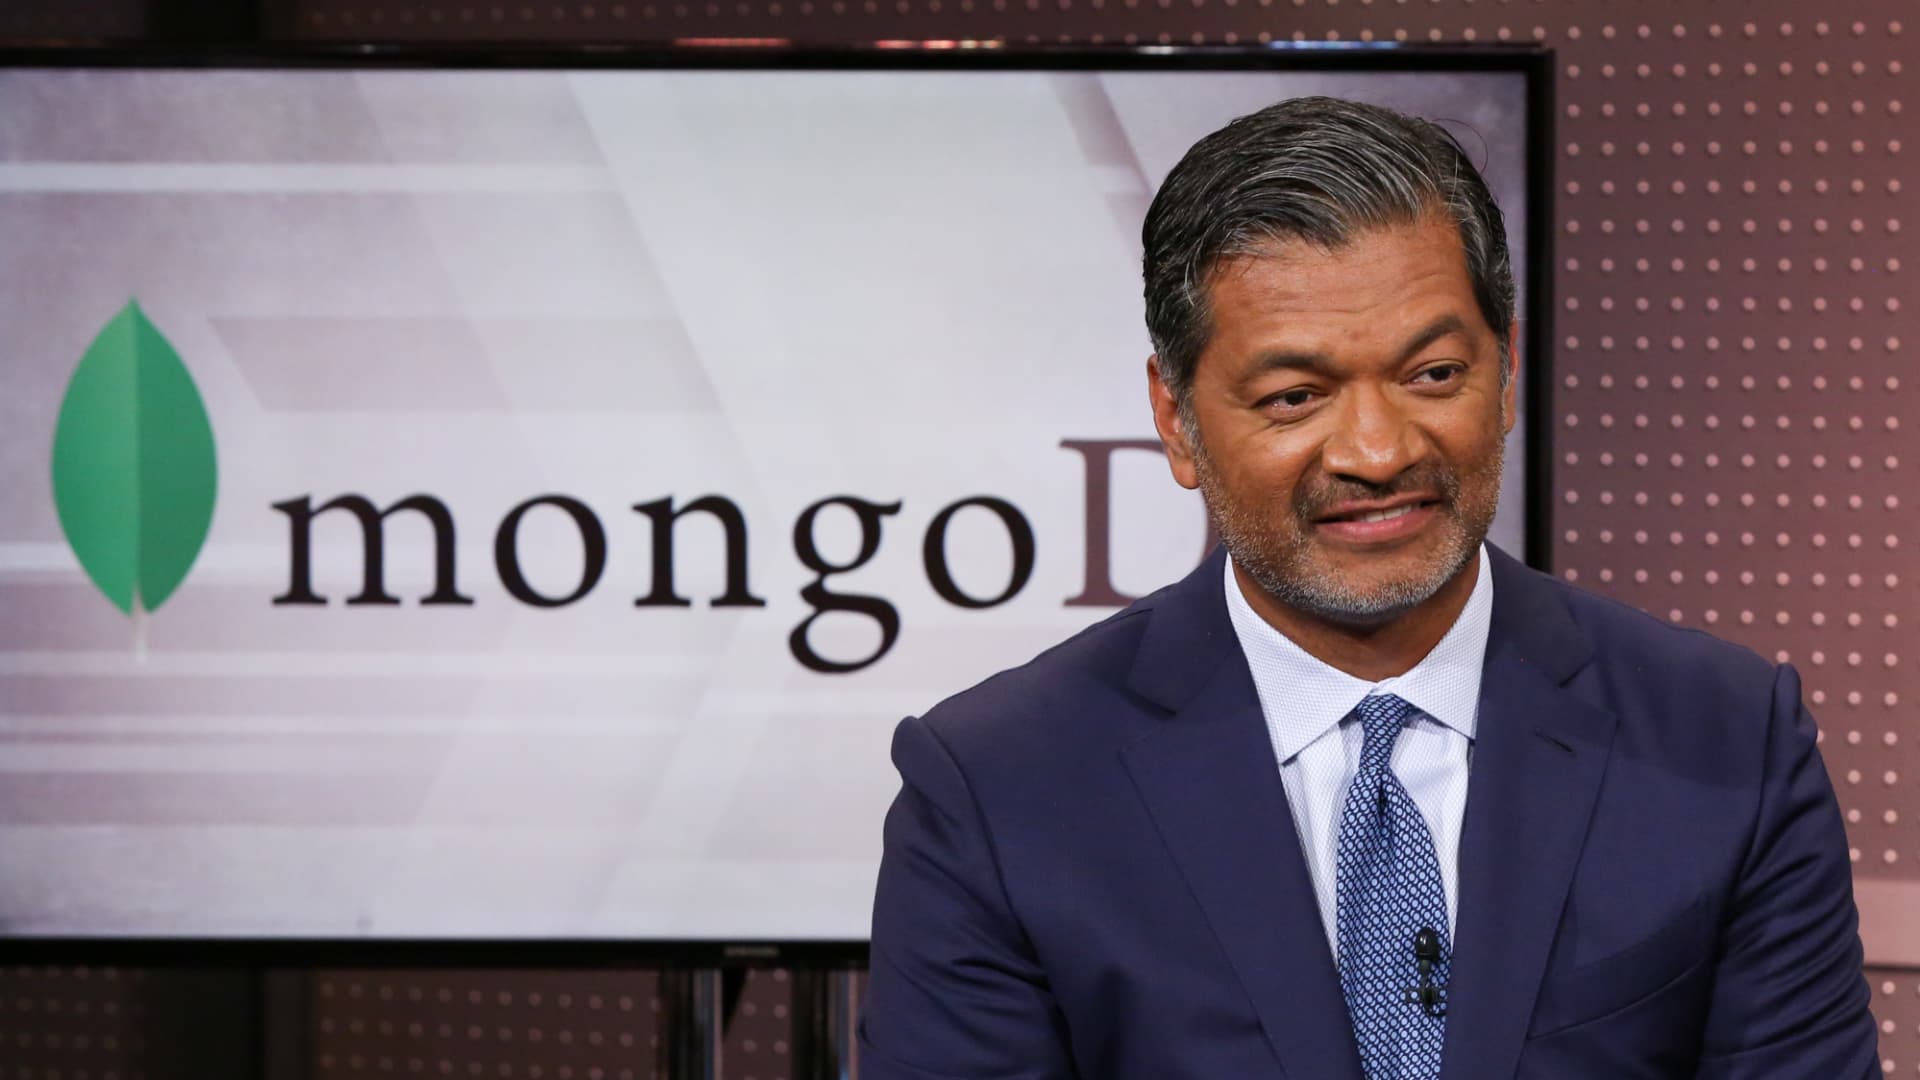 MongoDB stock jumps 27% after cloud database company shows surprise adjusted profit